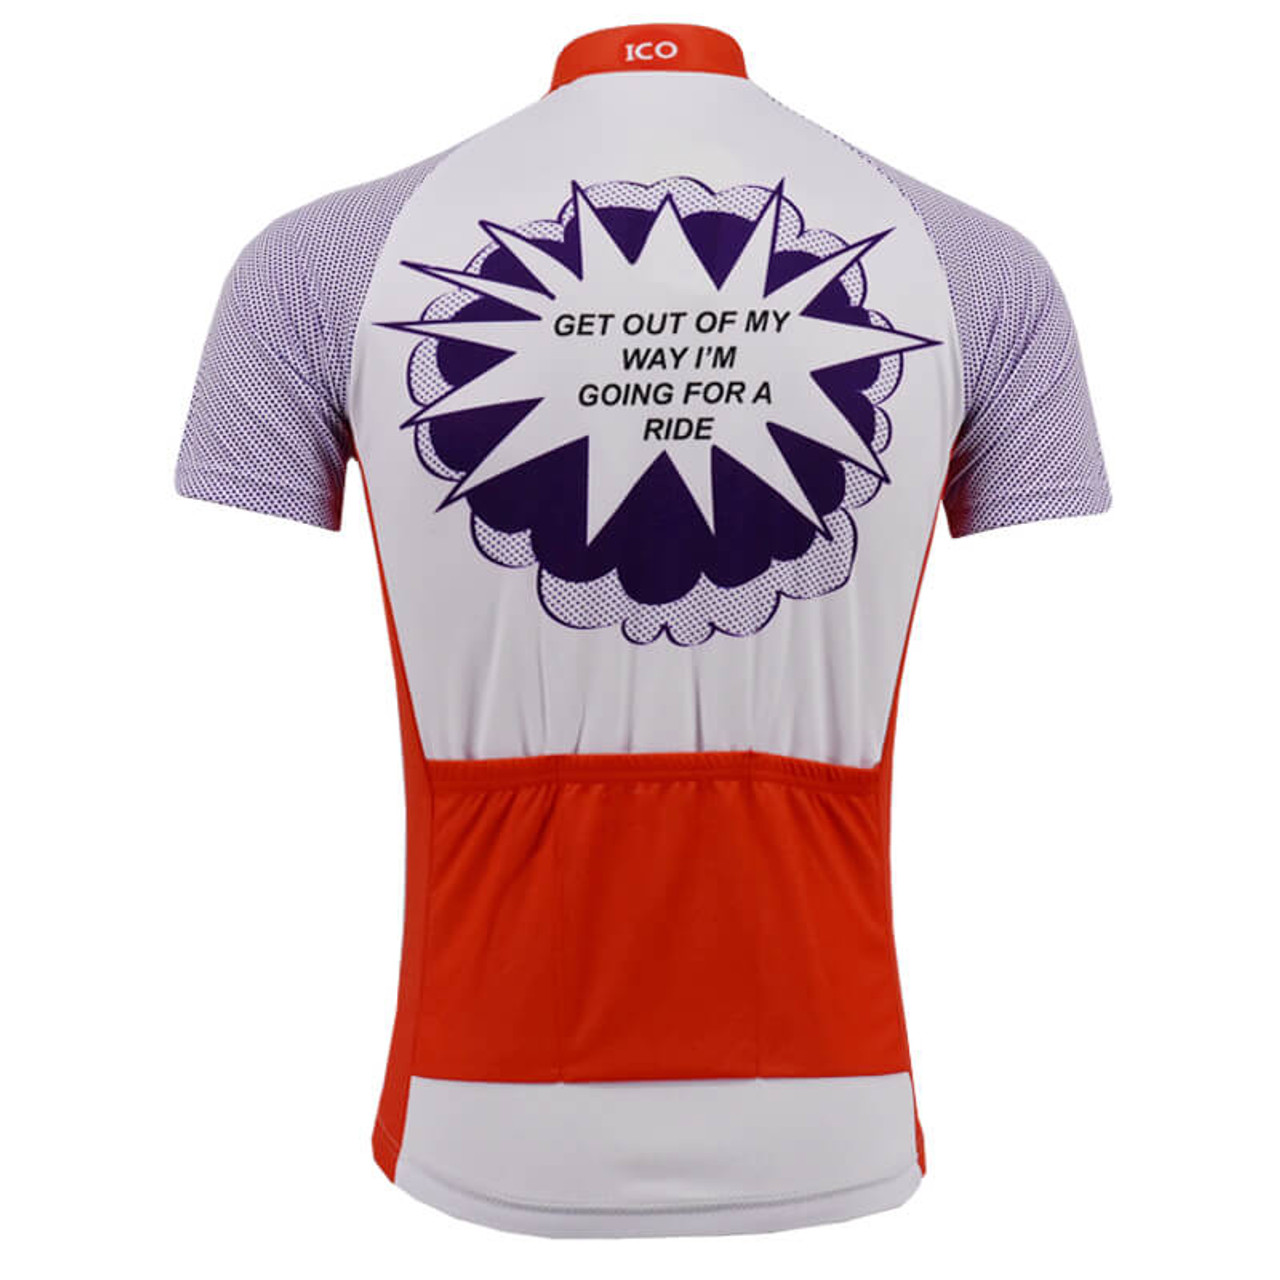 La Vie Claire Look Im Going For A Ride Cycling Jersey Freestylecycling Com